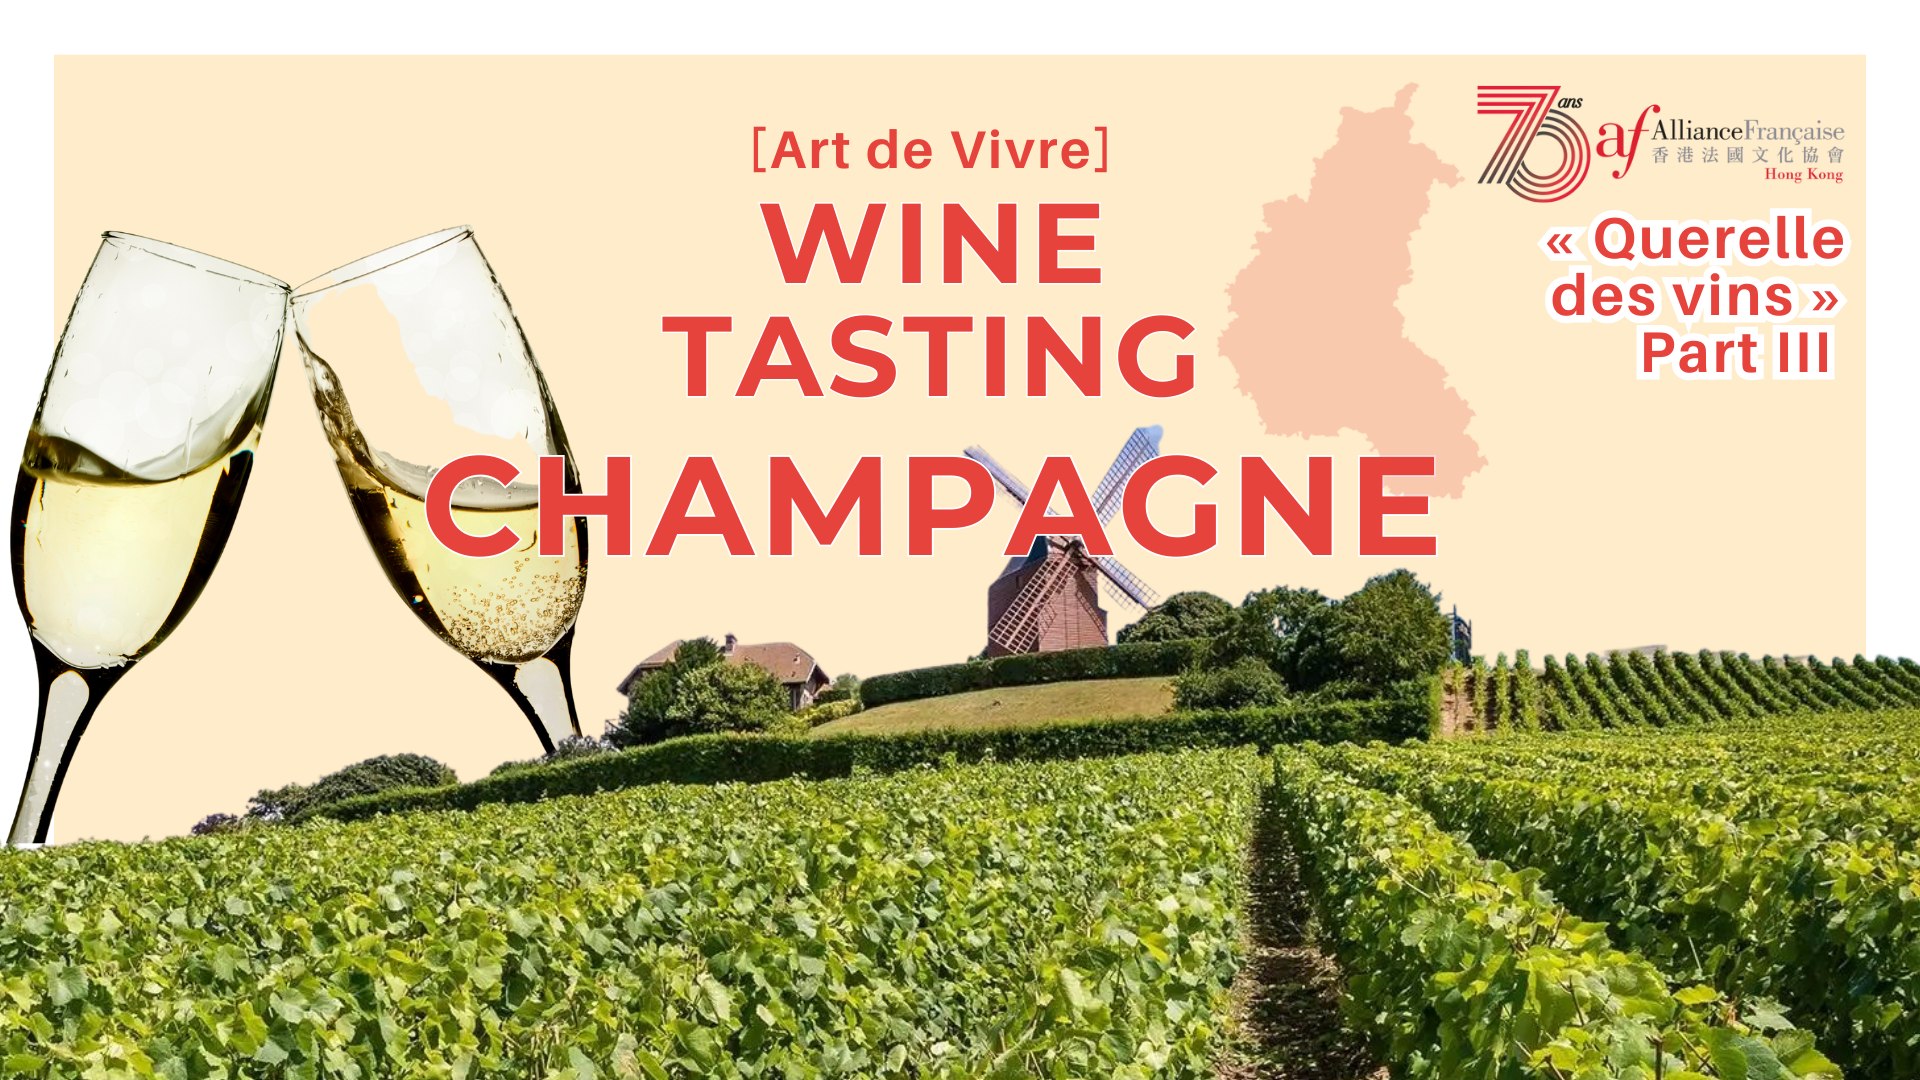 Wine Tasting : Champagne is only from Champagne!